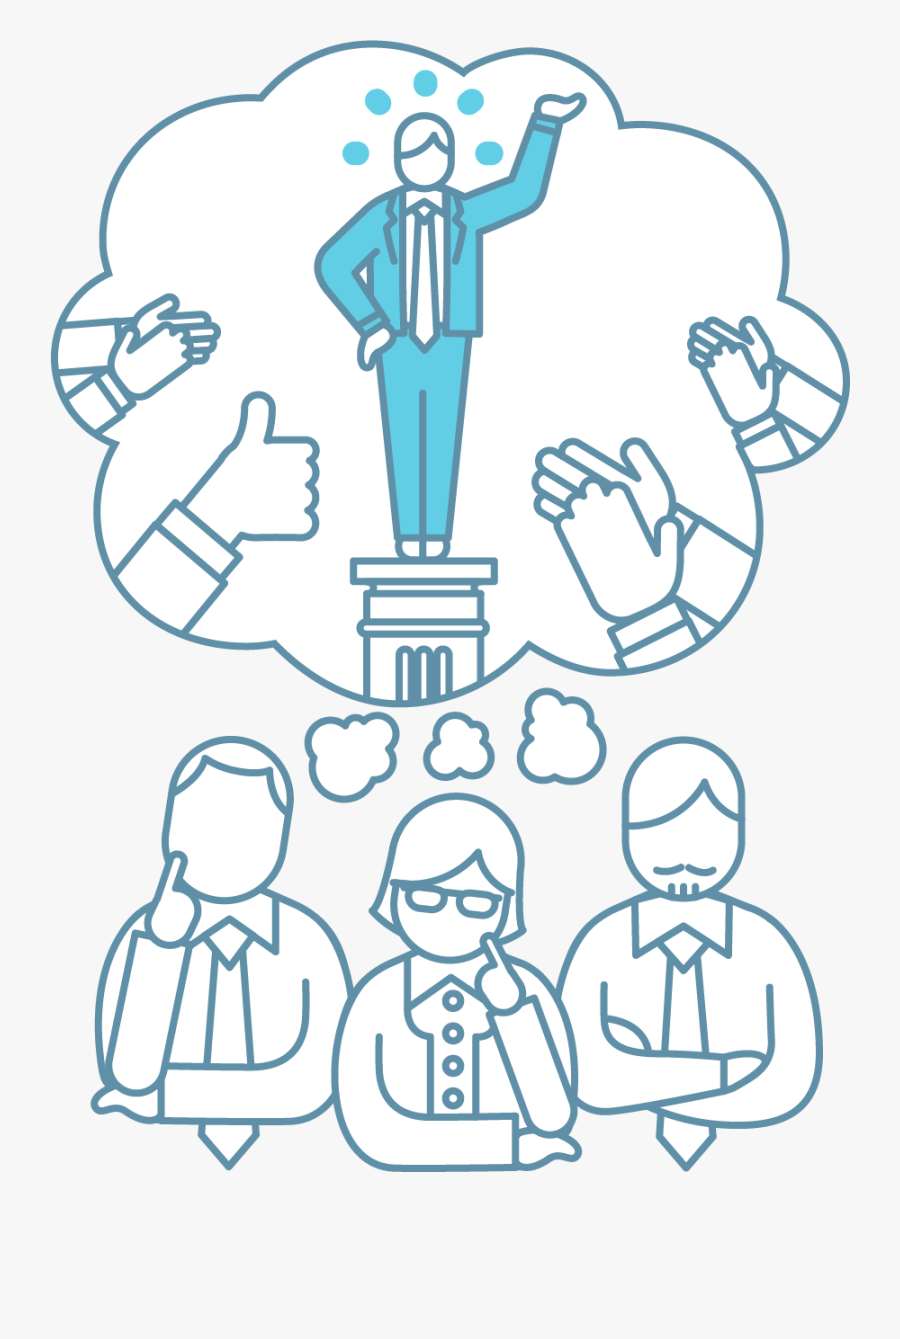 If You"ve Tried Fixing Your Team Problems, Maybe You - Illustration, Transparent Clipart